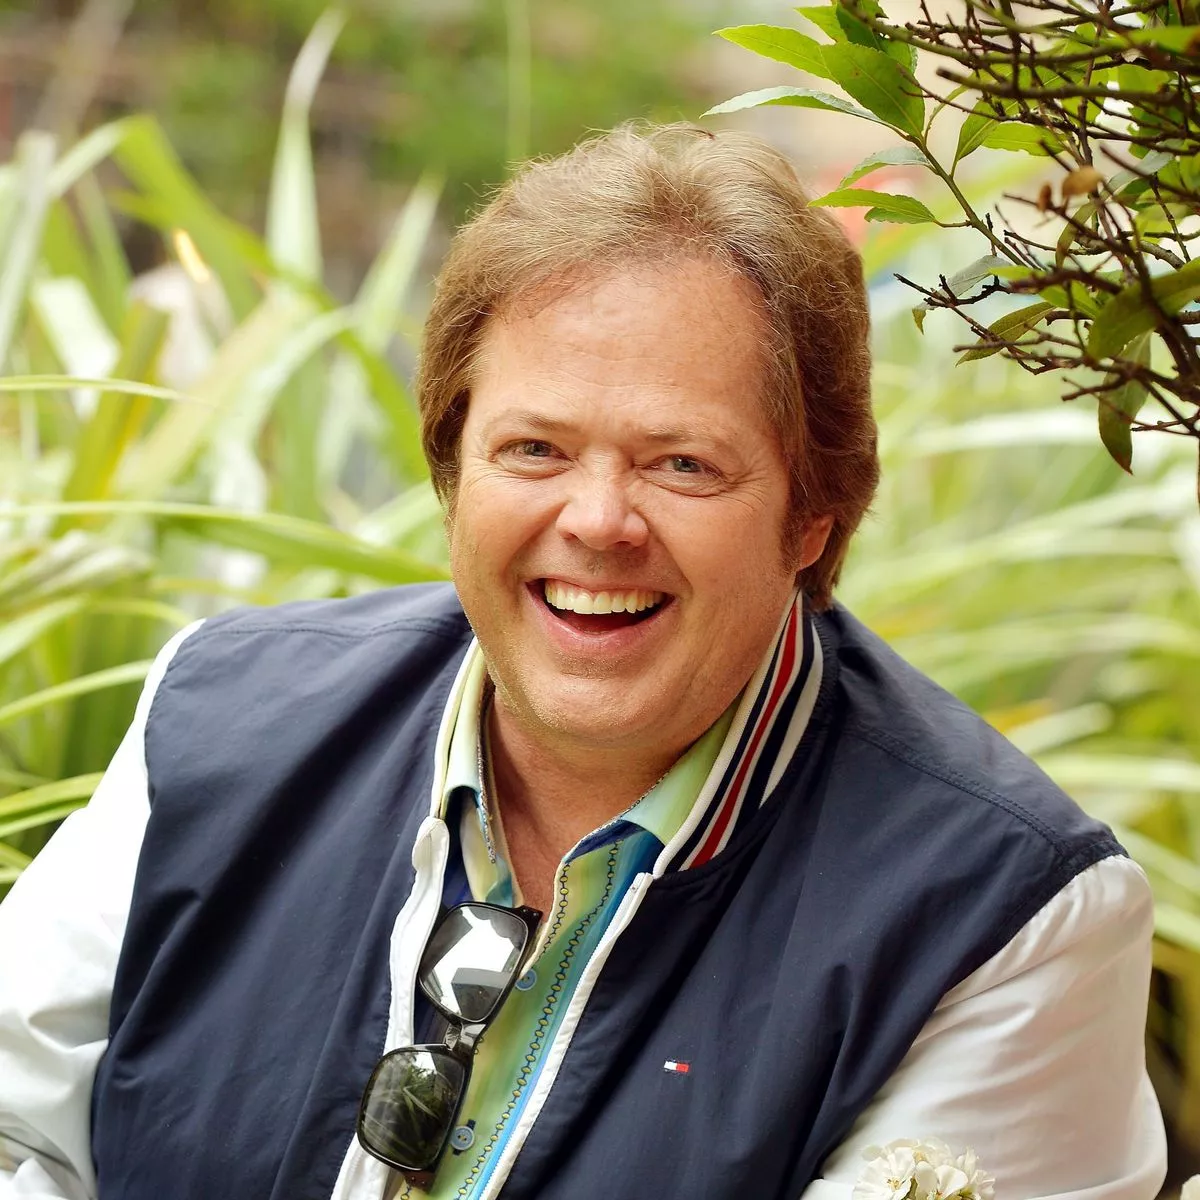 What caused Jimmy Osmond's stroke?